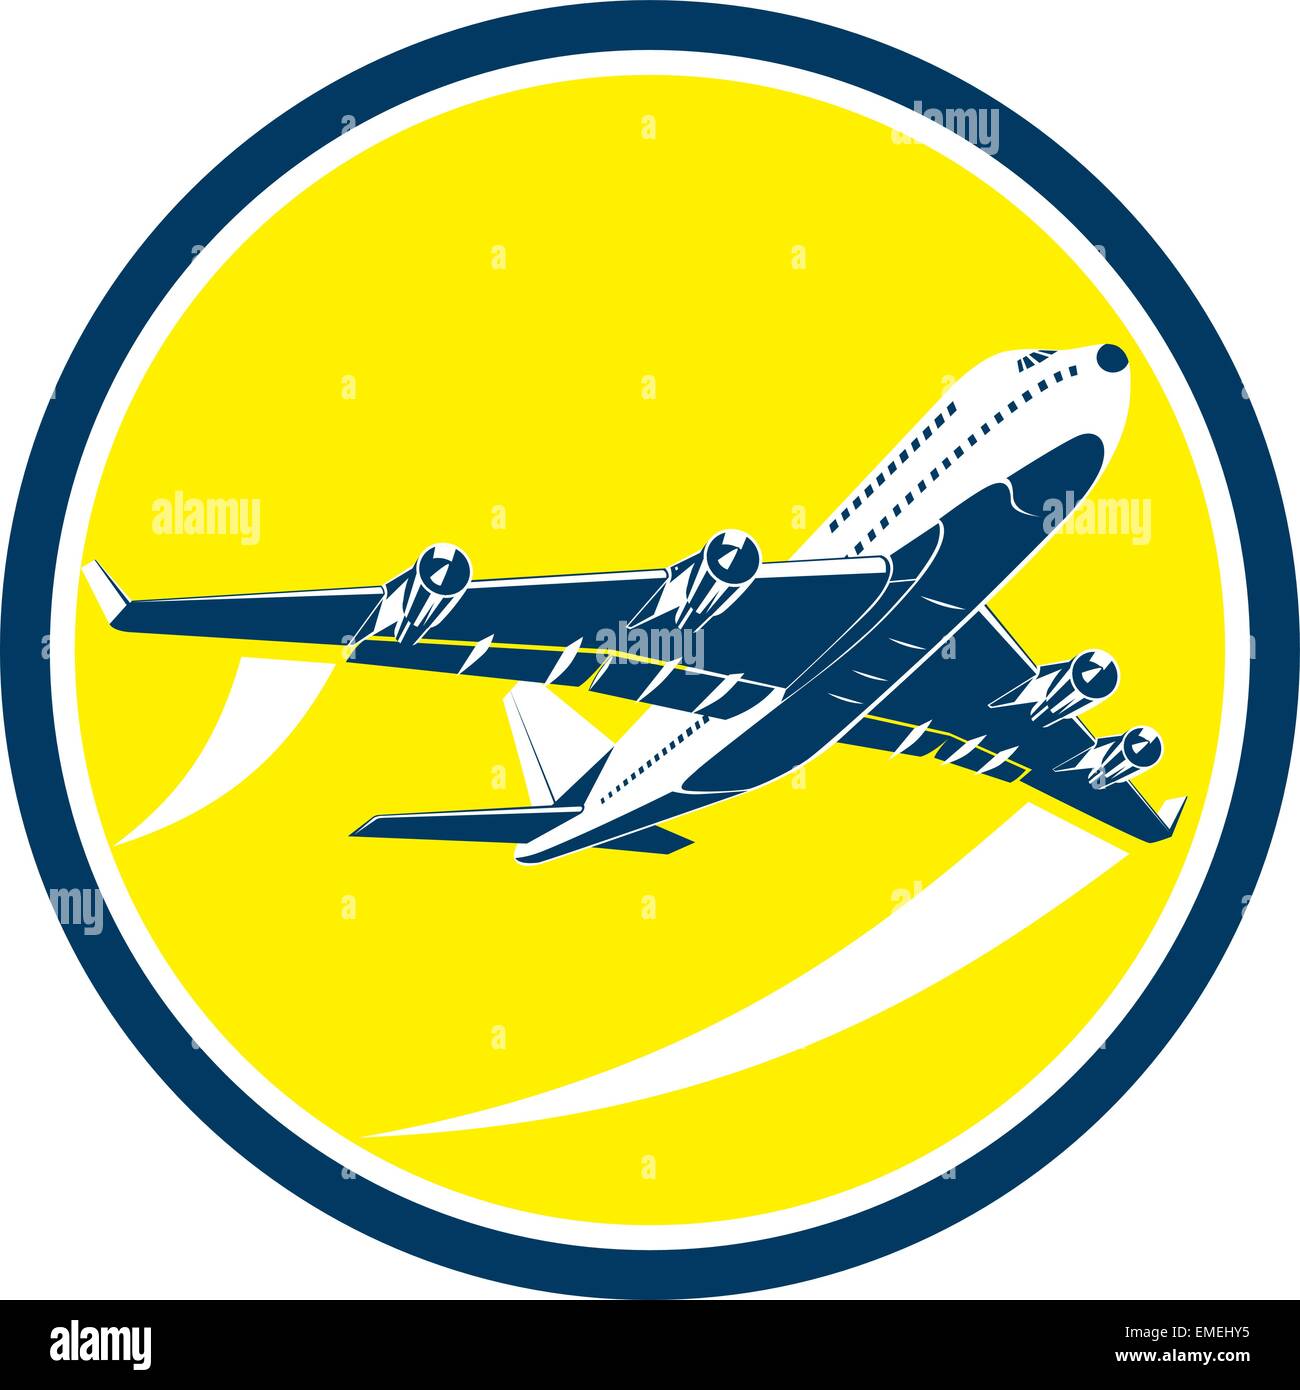 Commercial Jet Plane Airline Circle Retro Stock Vector